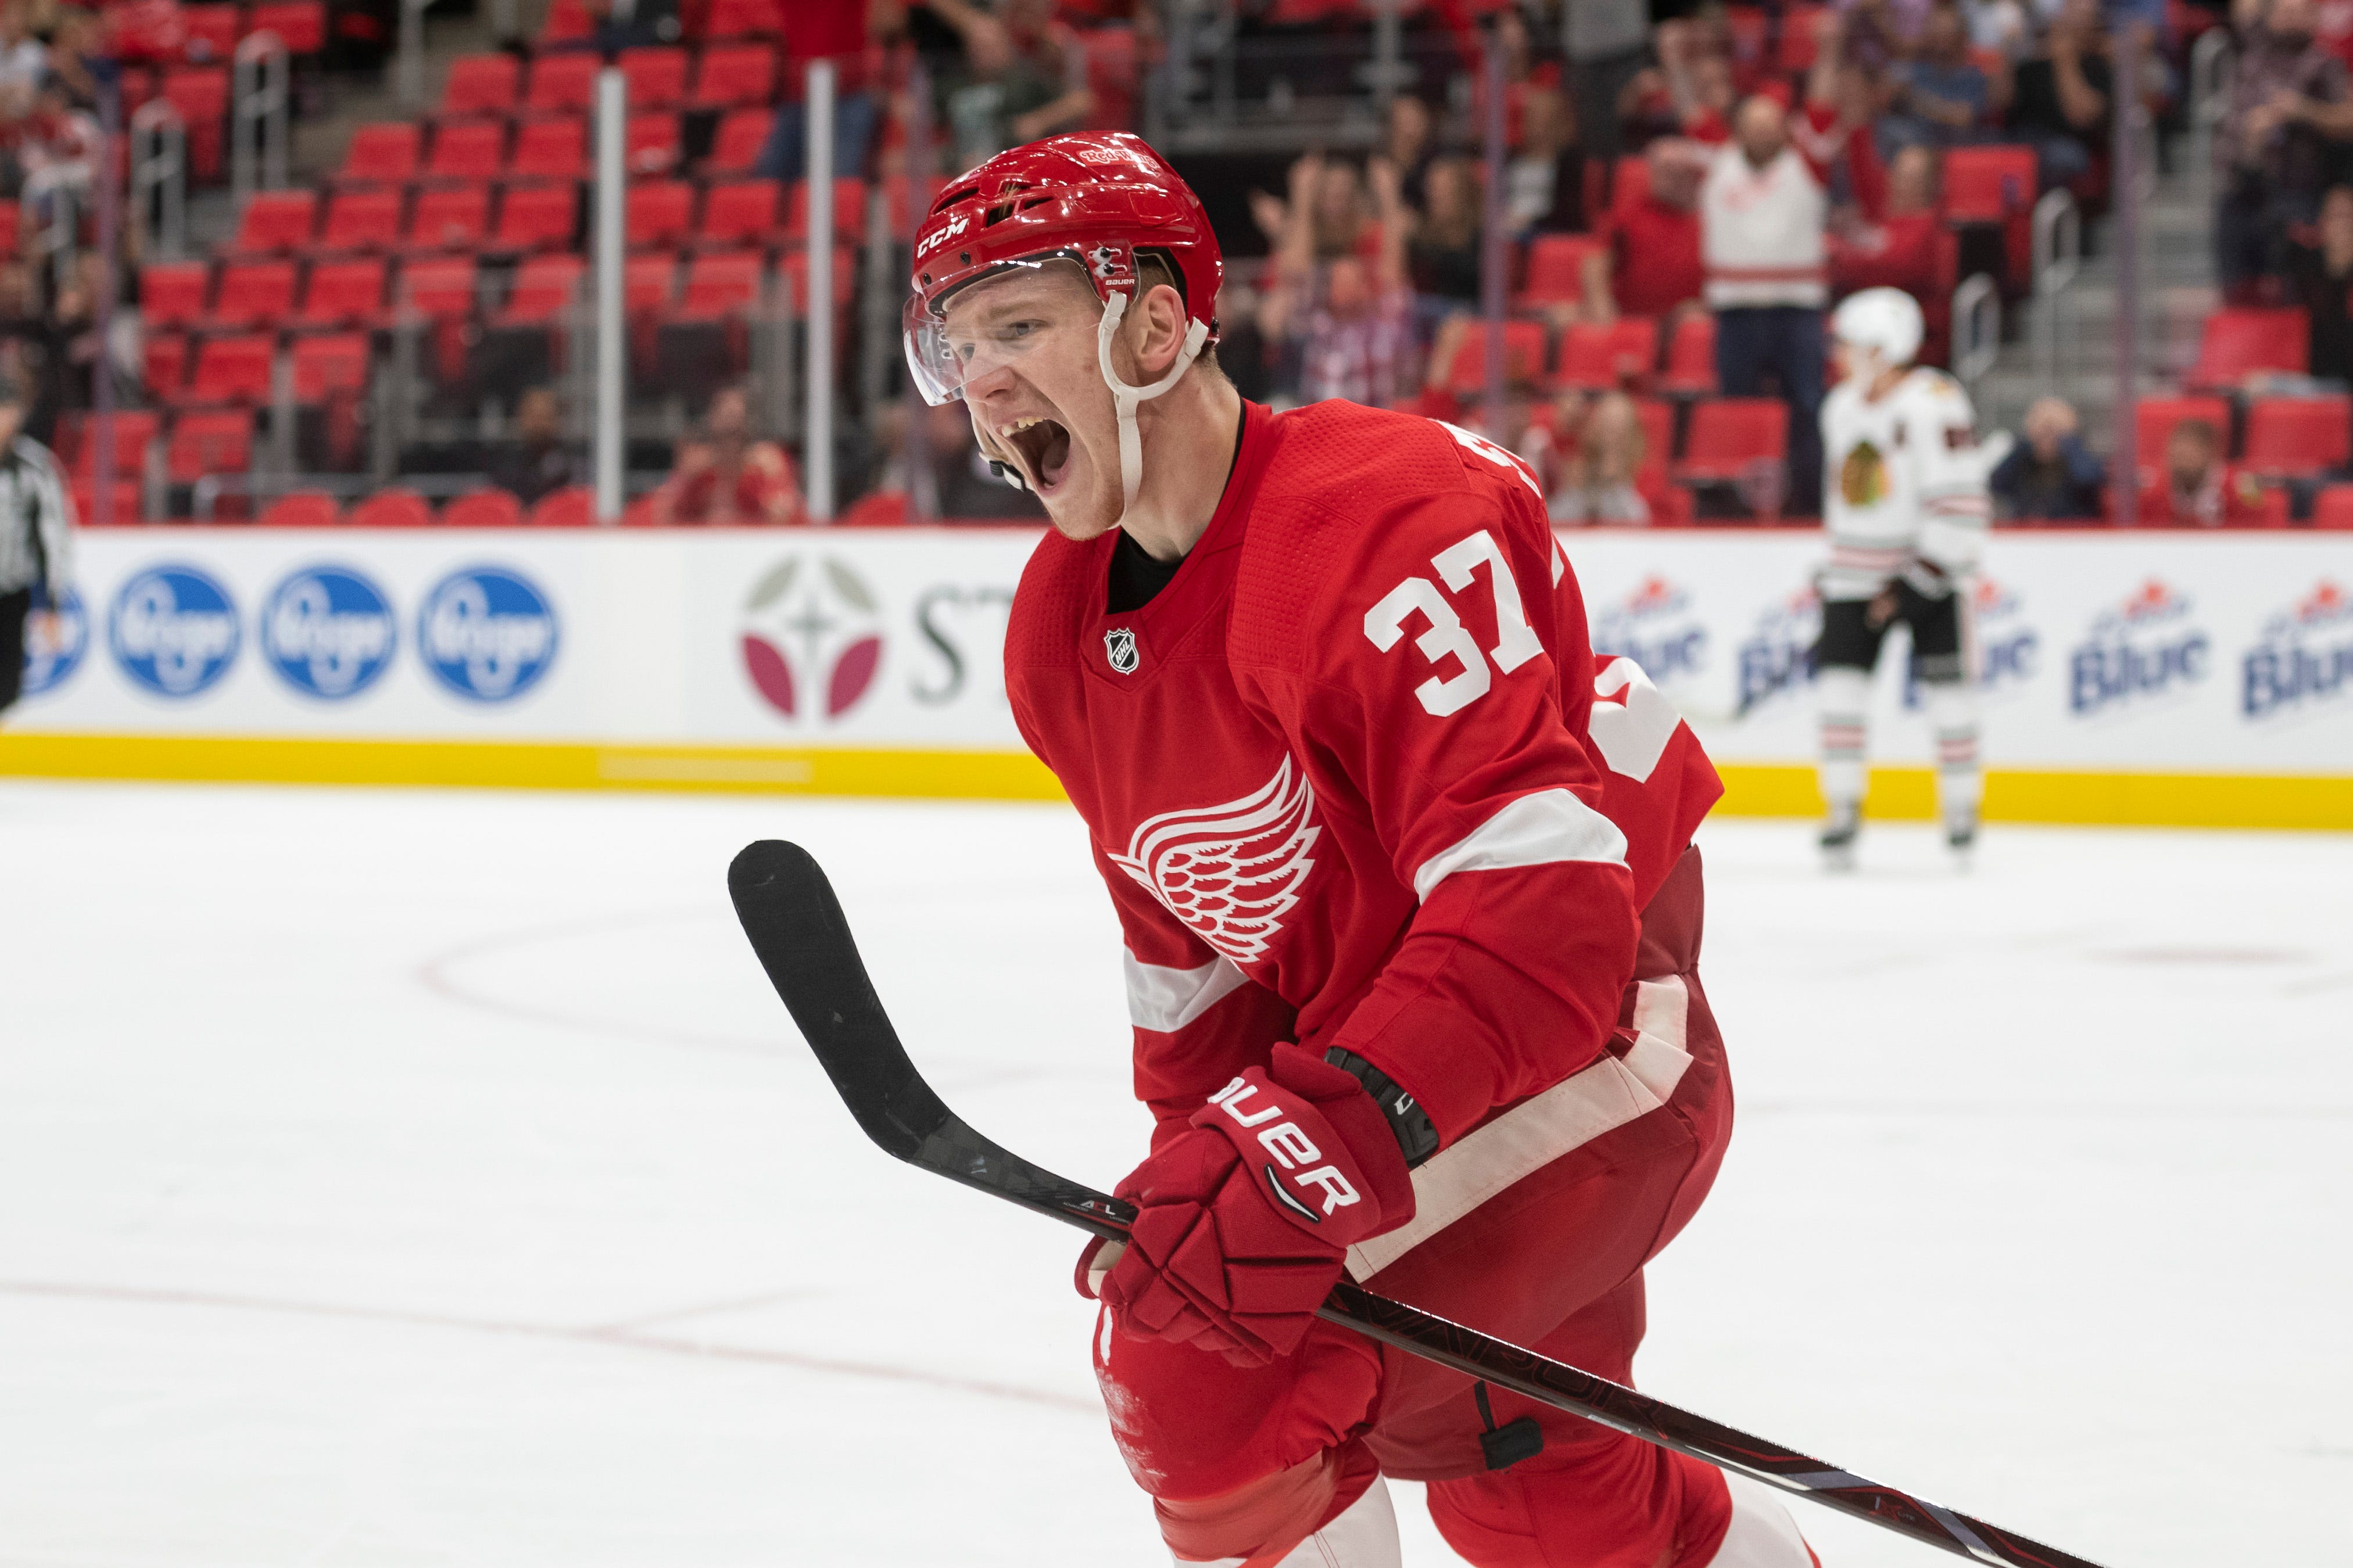 Detroit right wing Evgeny Svechnikov celebrates his winning goal in the third period.